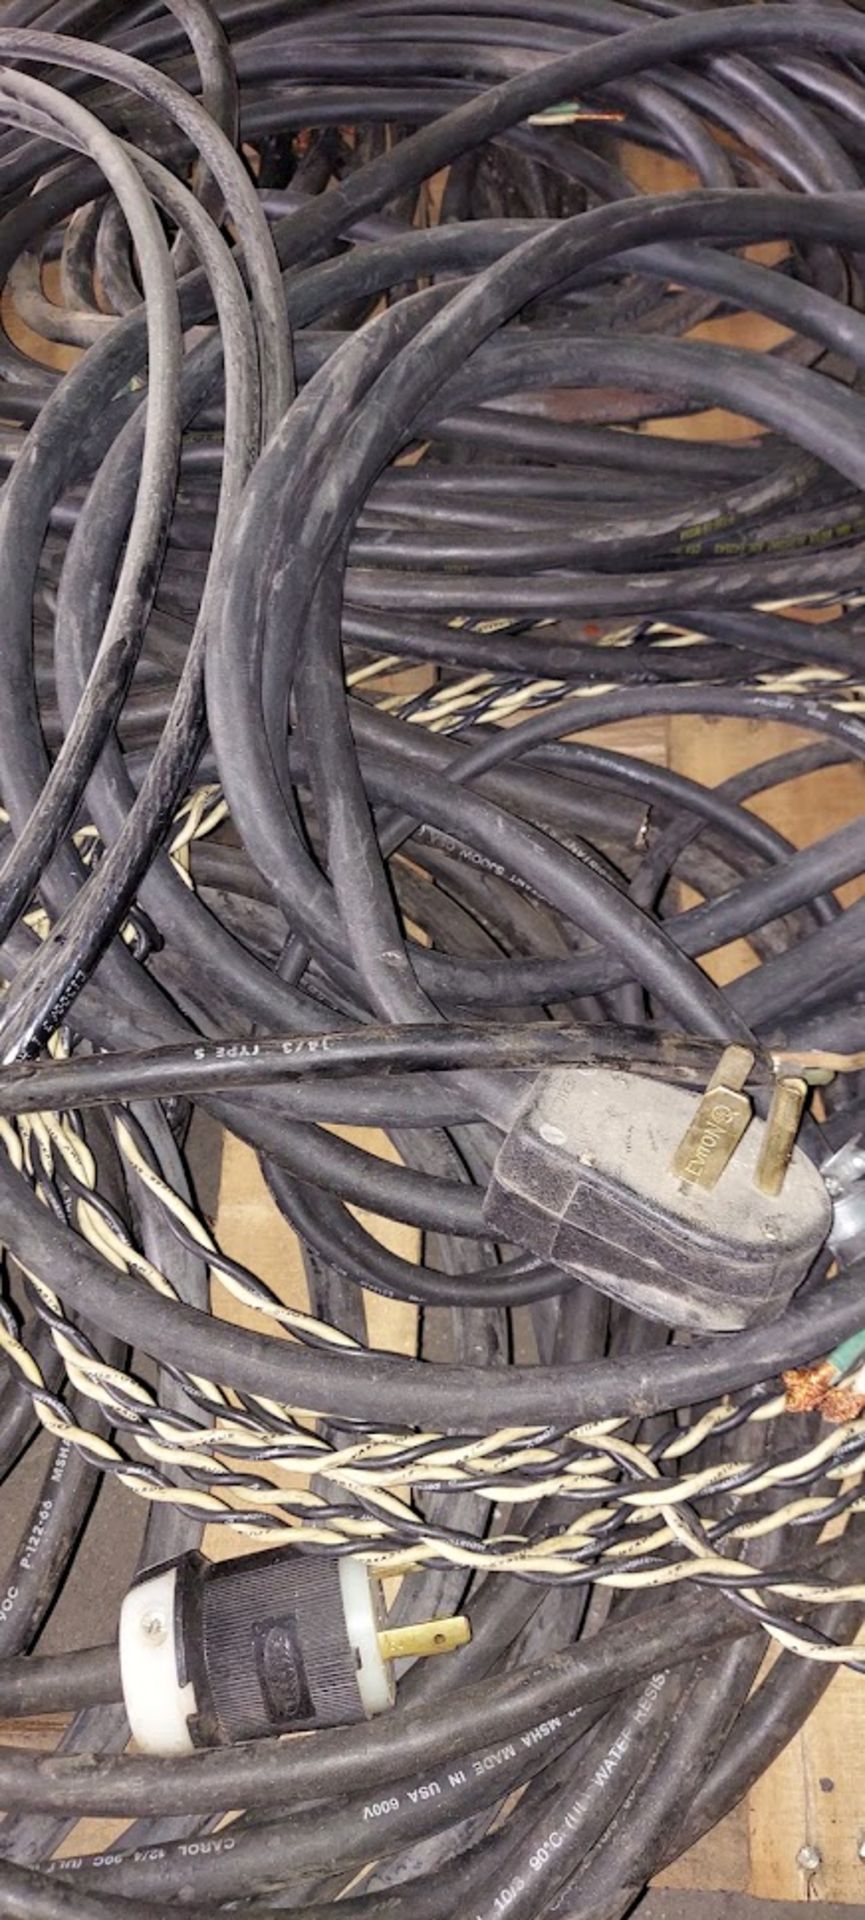 Pallet of Industrial Electric Cords & Plugs - Image 3 of 3